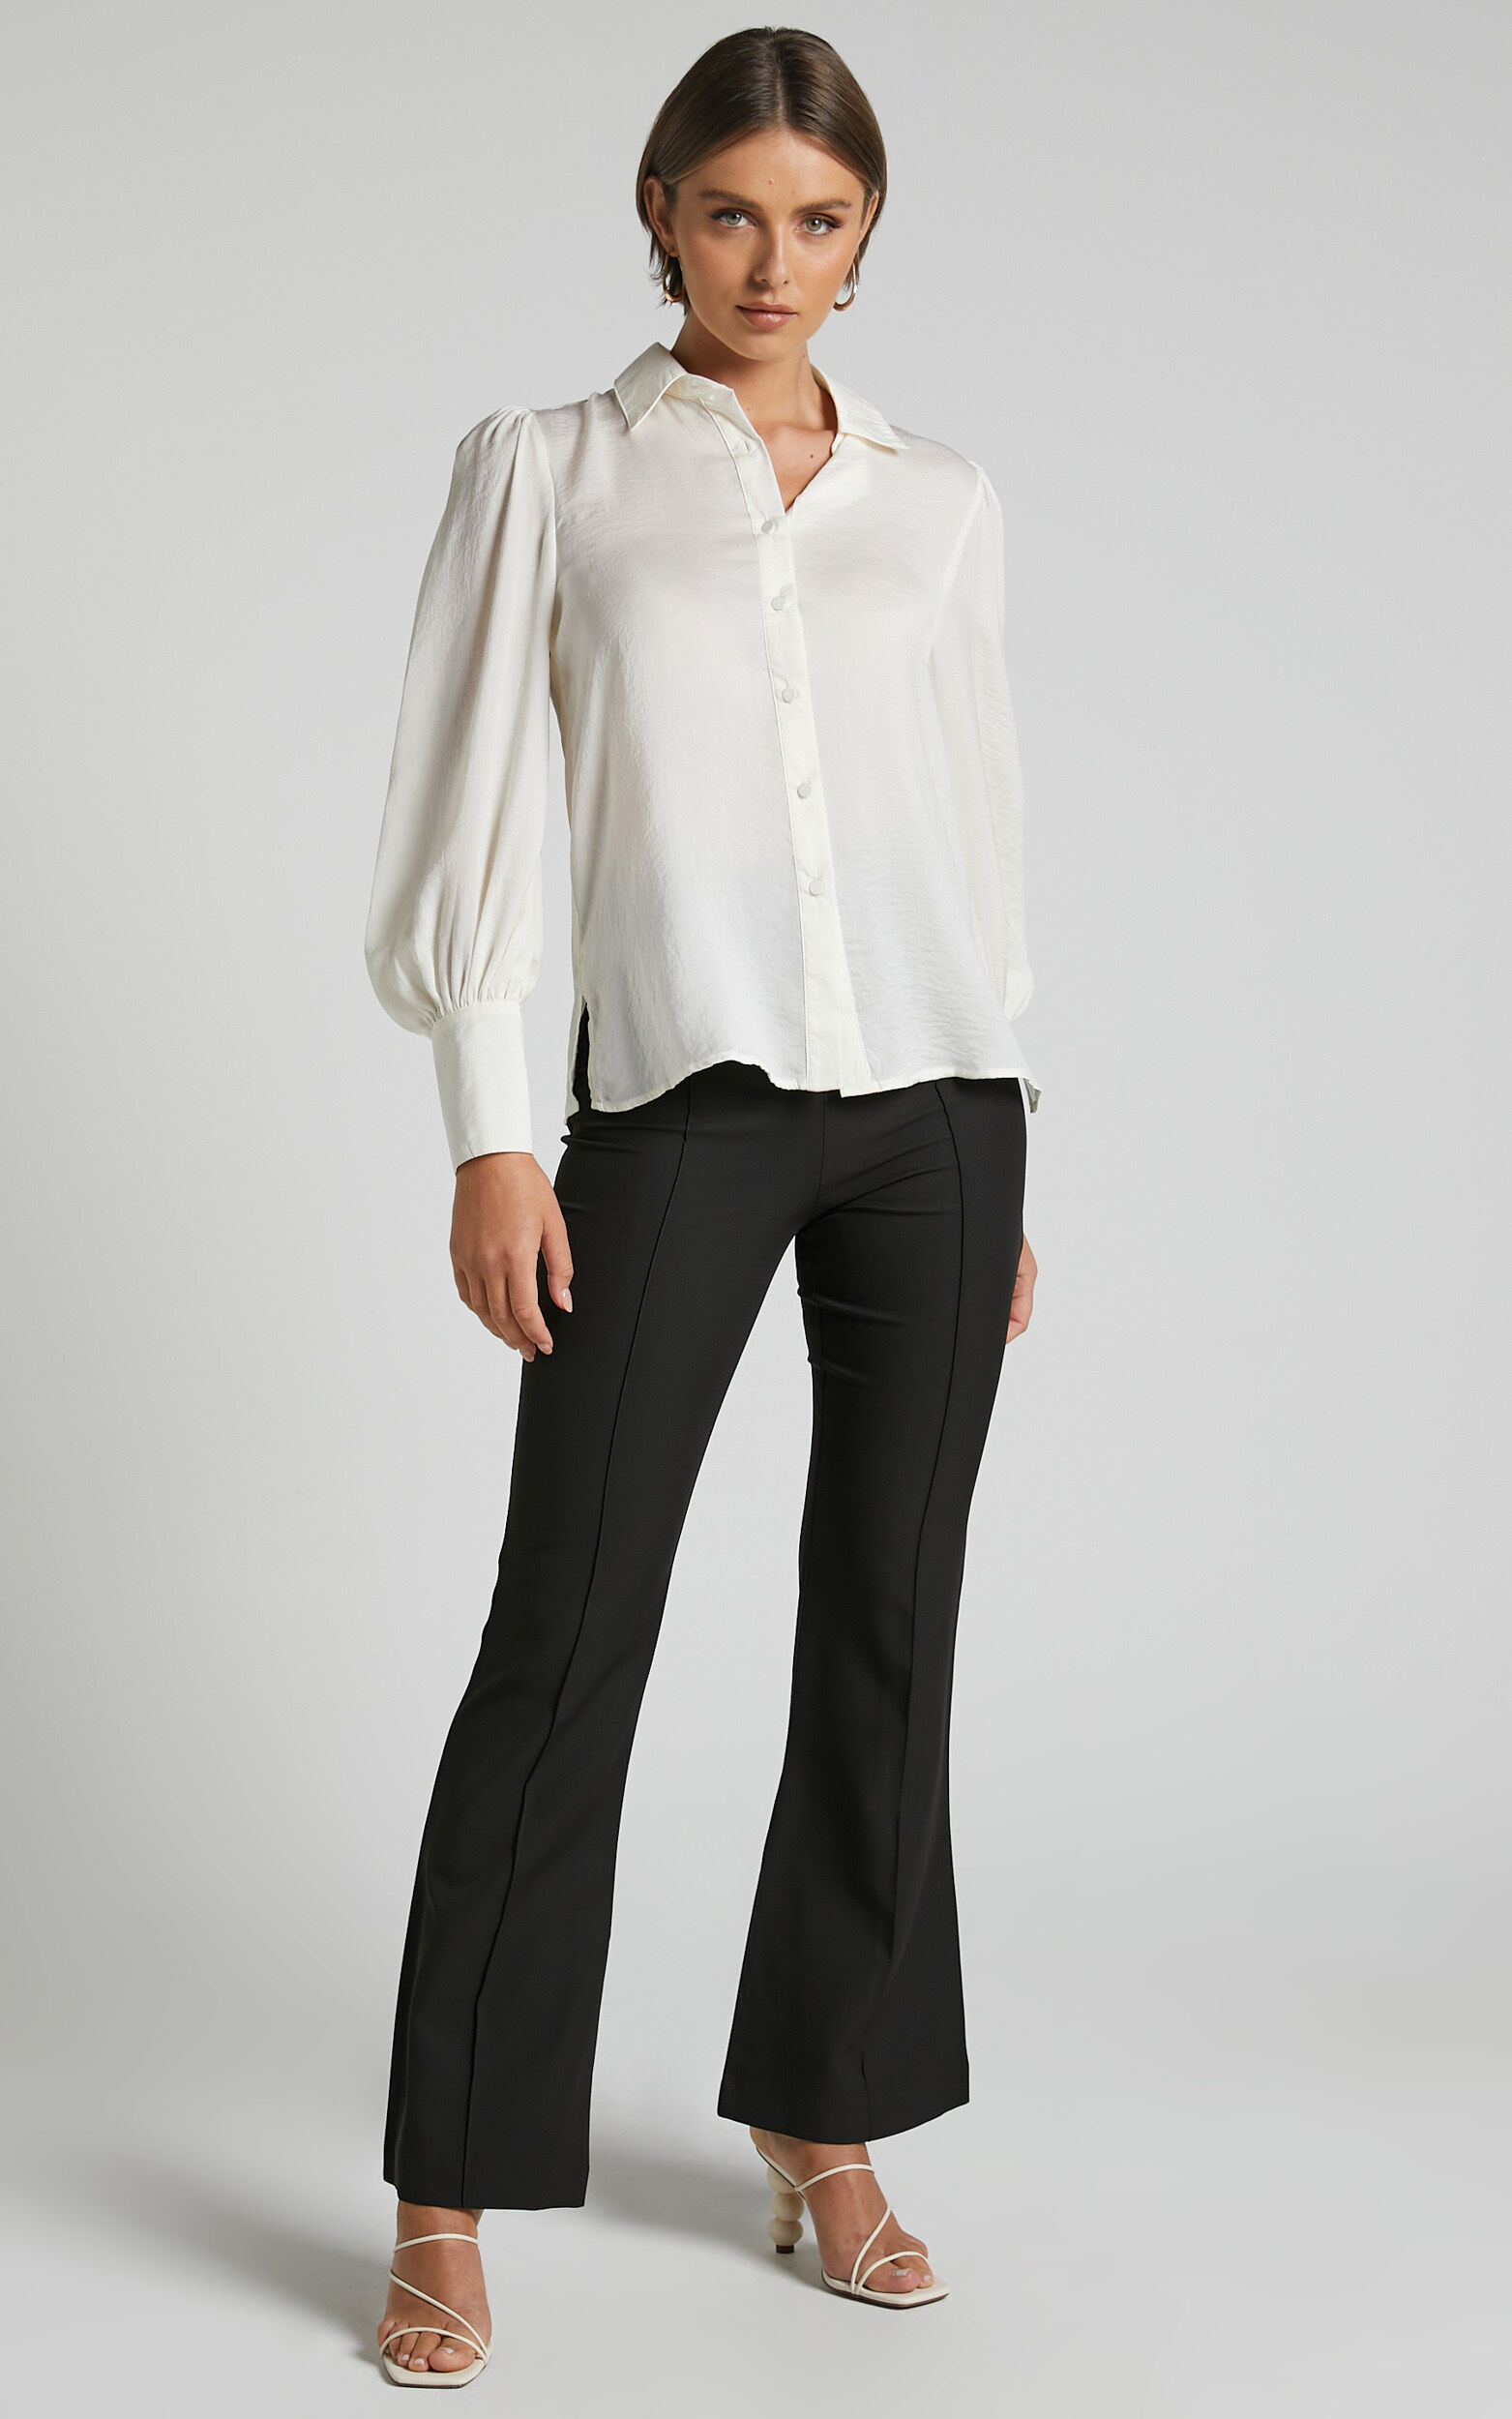 Lafiel Shirt - Collared Long Sleeve Button Up Shirt in Ivory - 06, WHT1